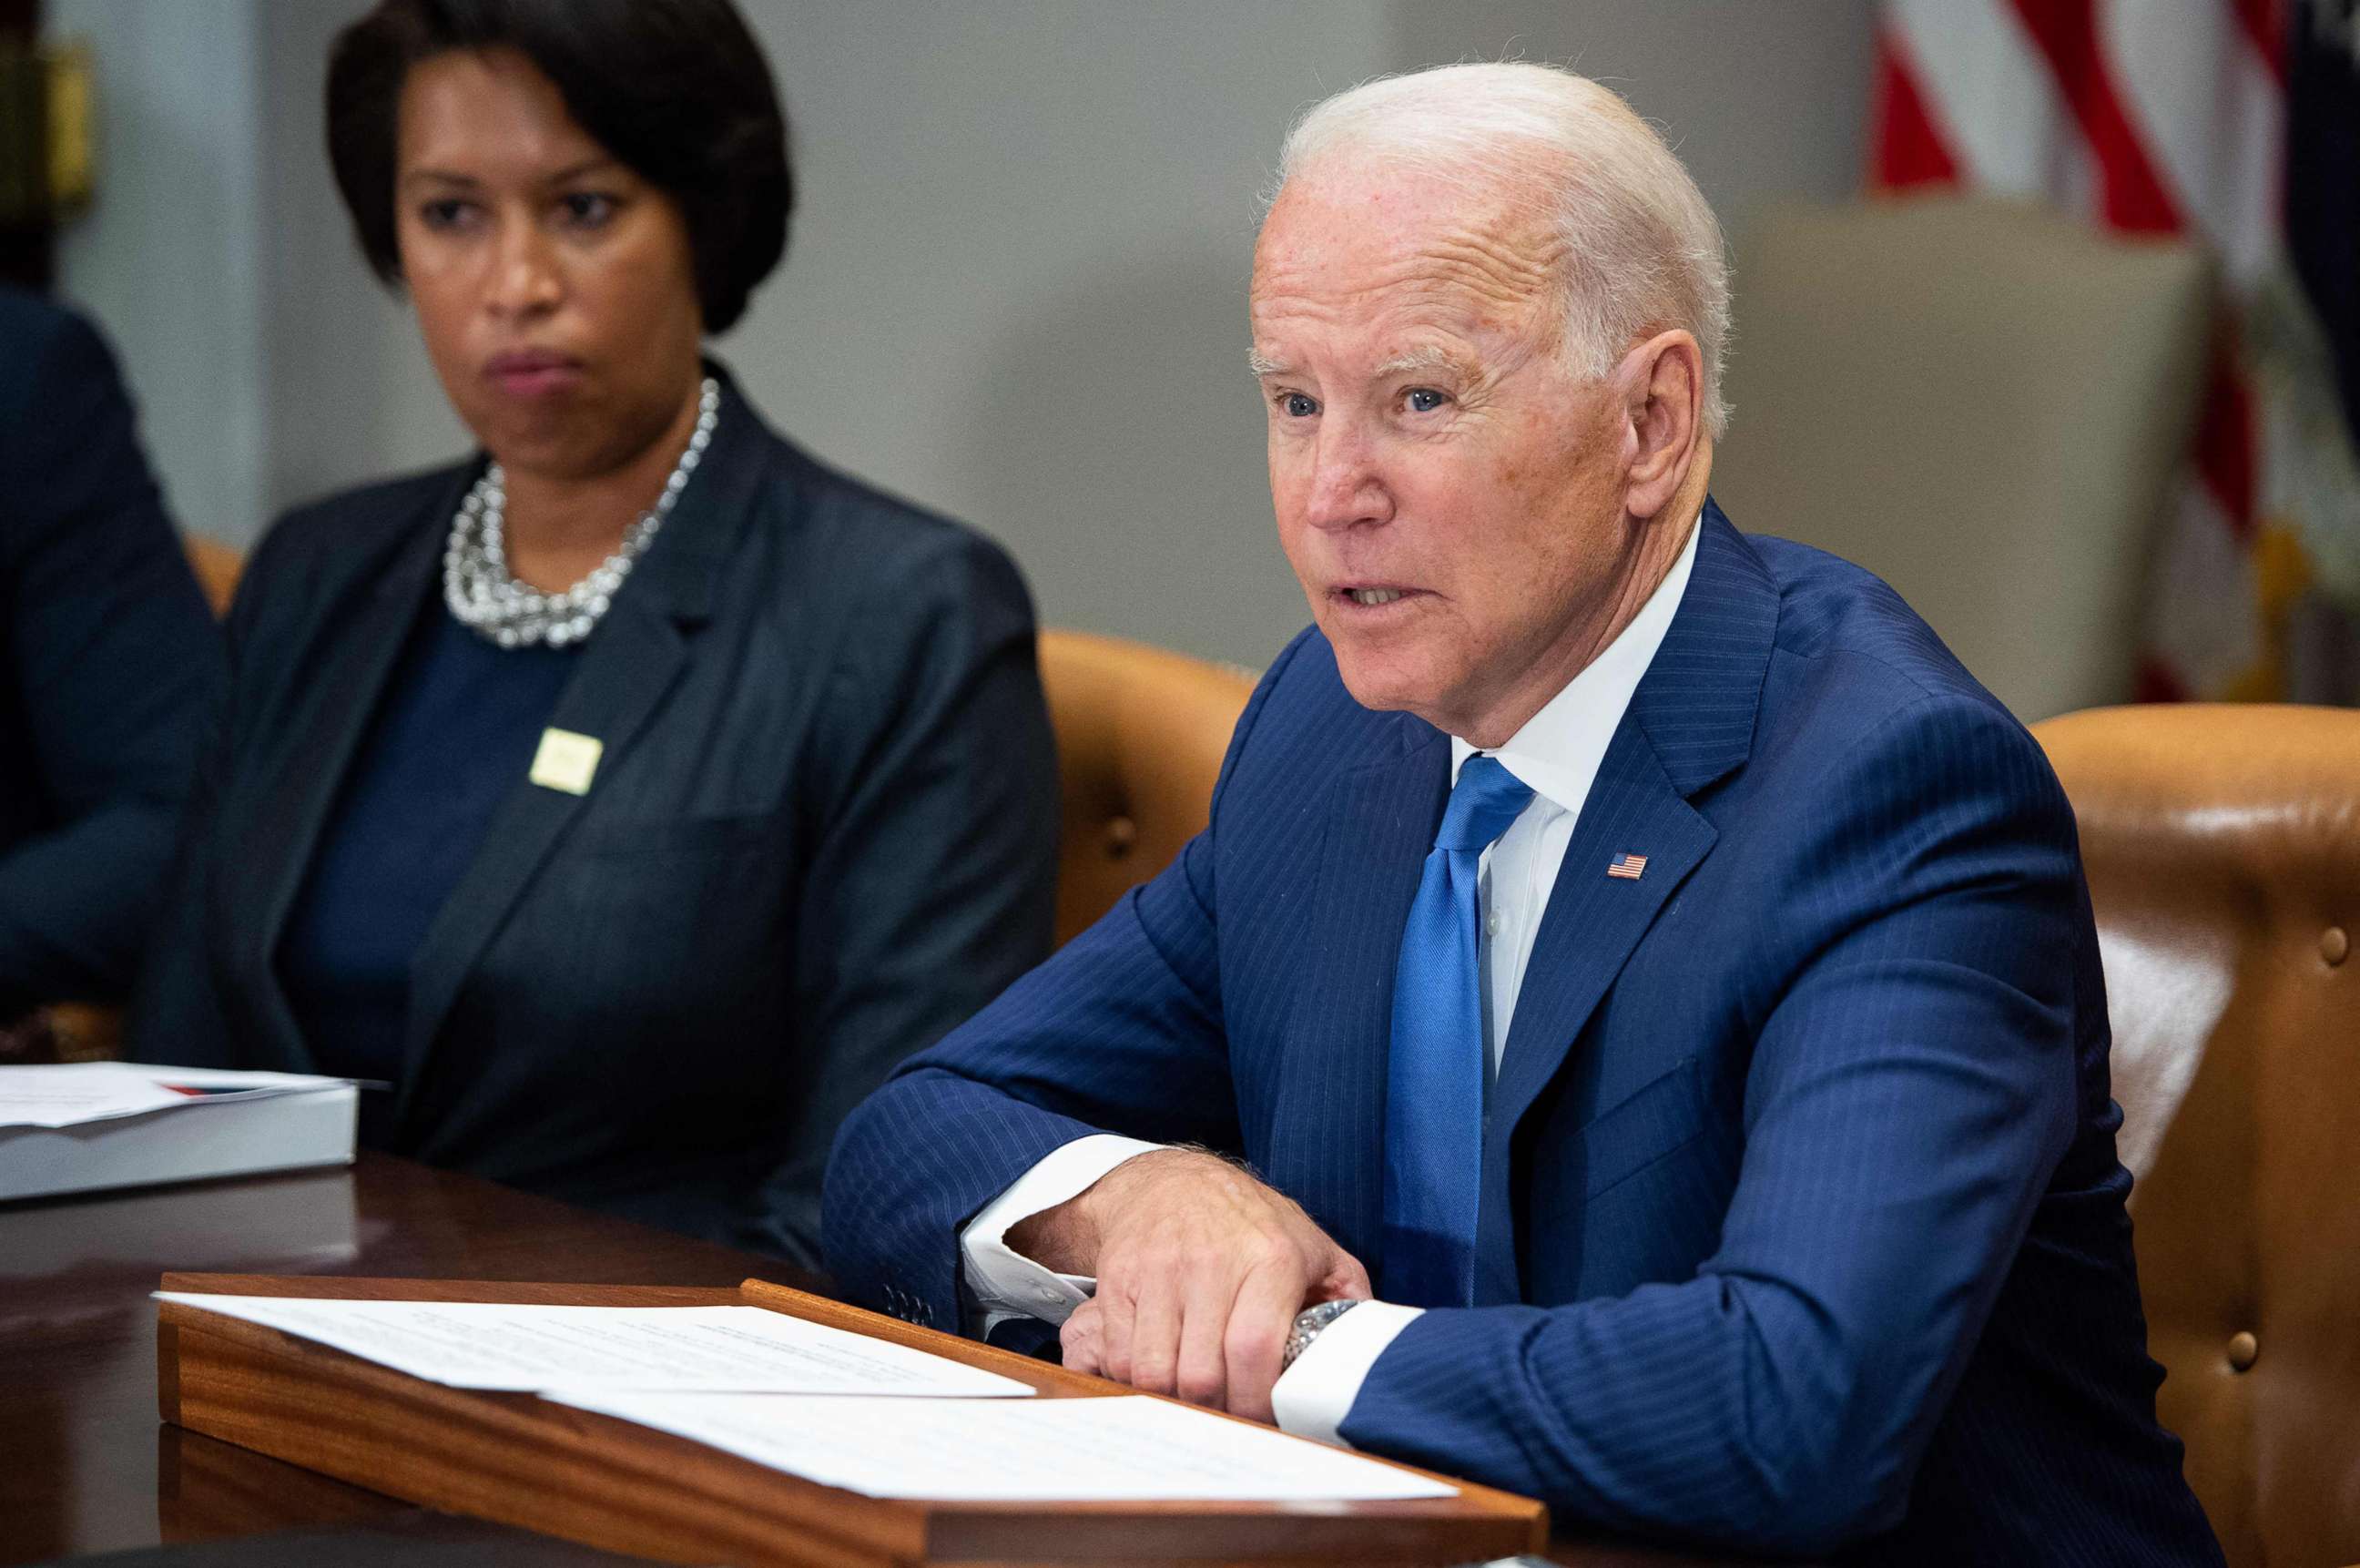 PHOTO: President Joe Biden speaks during a meeting about reducing gun violence with local leaders from around the country, including Washington, D.C., Mayor Muriel Bowser, left, in the Roosevelt Room of the White House, July 12, 2021.